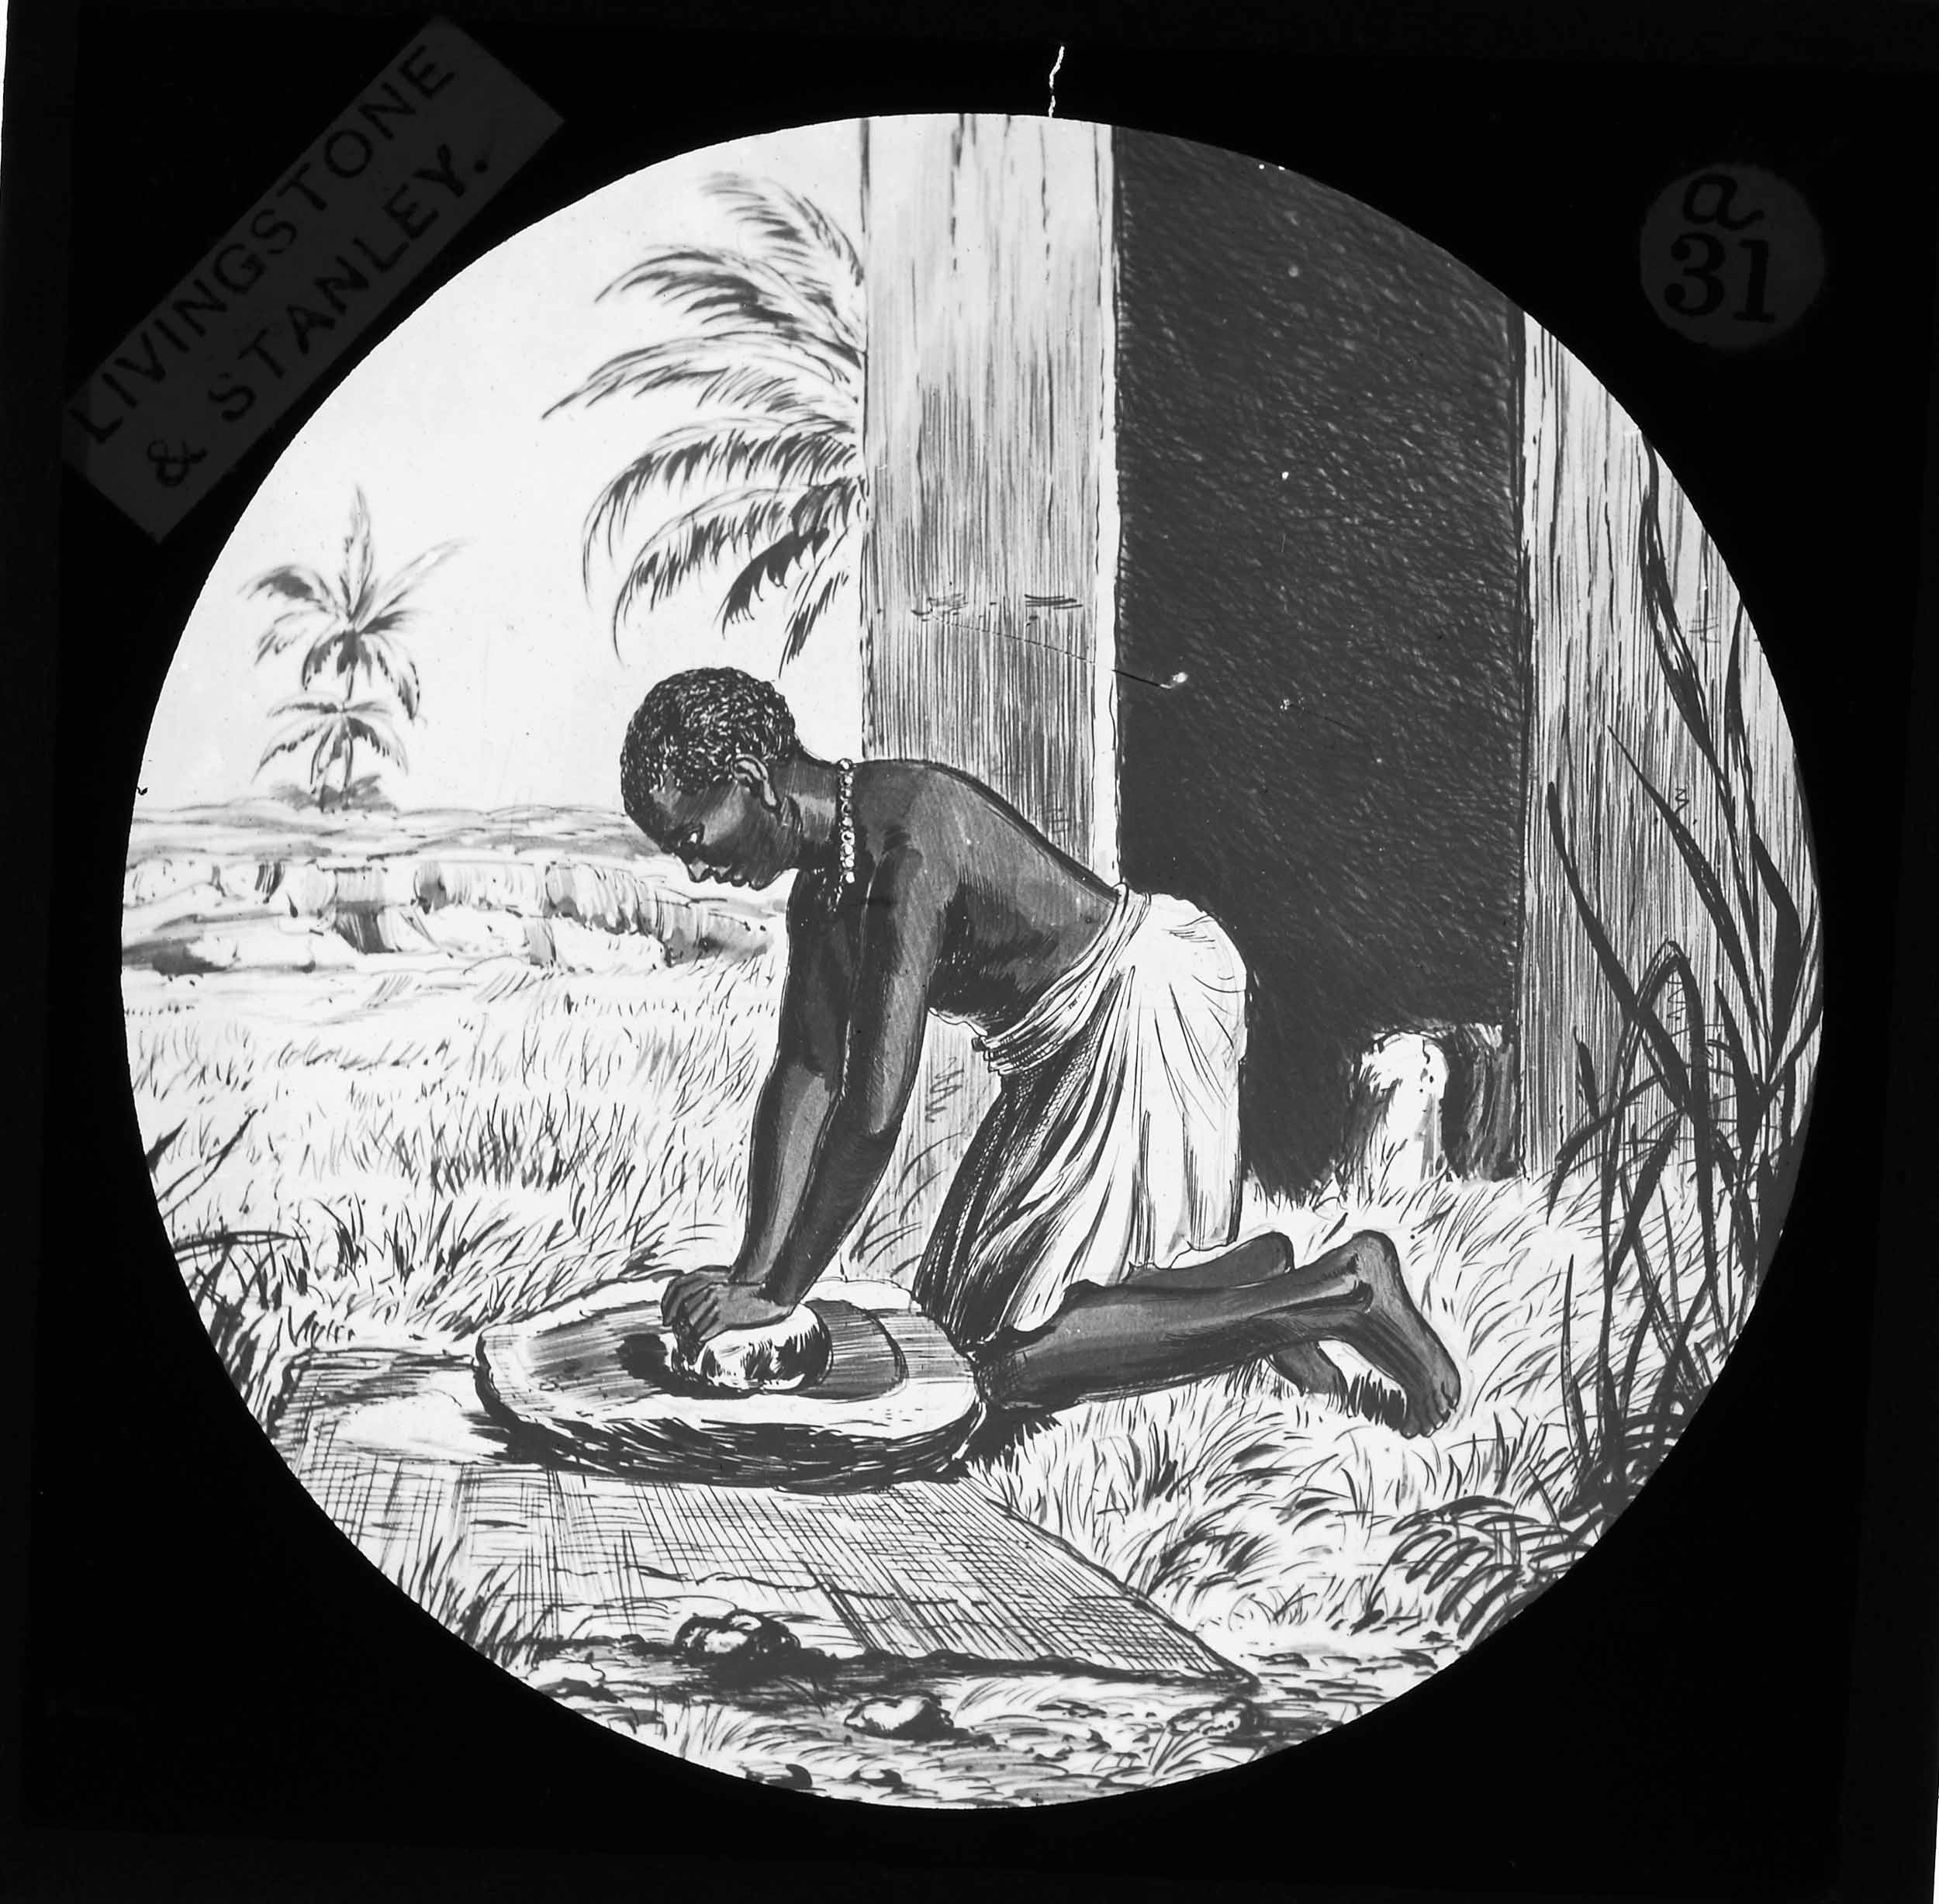 Magic Lantern Slides: Livingstone and Stanley Series, c.1900. Copyright National Library of Scotland. Creative Commons Share-alike 2.5 UK: Scotland (https://creativecommons.org/licenses/by-nc-sa/2.5/scotland/).